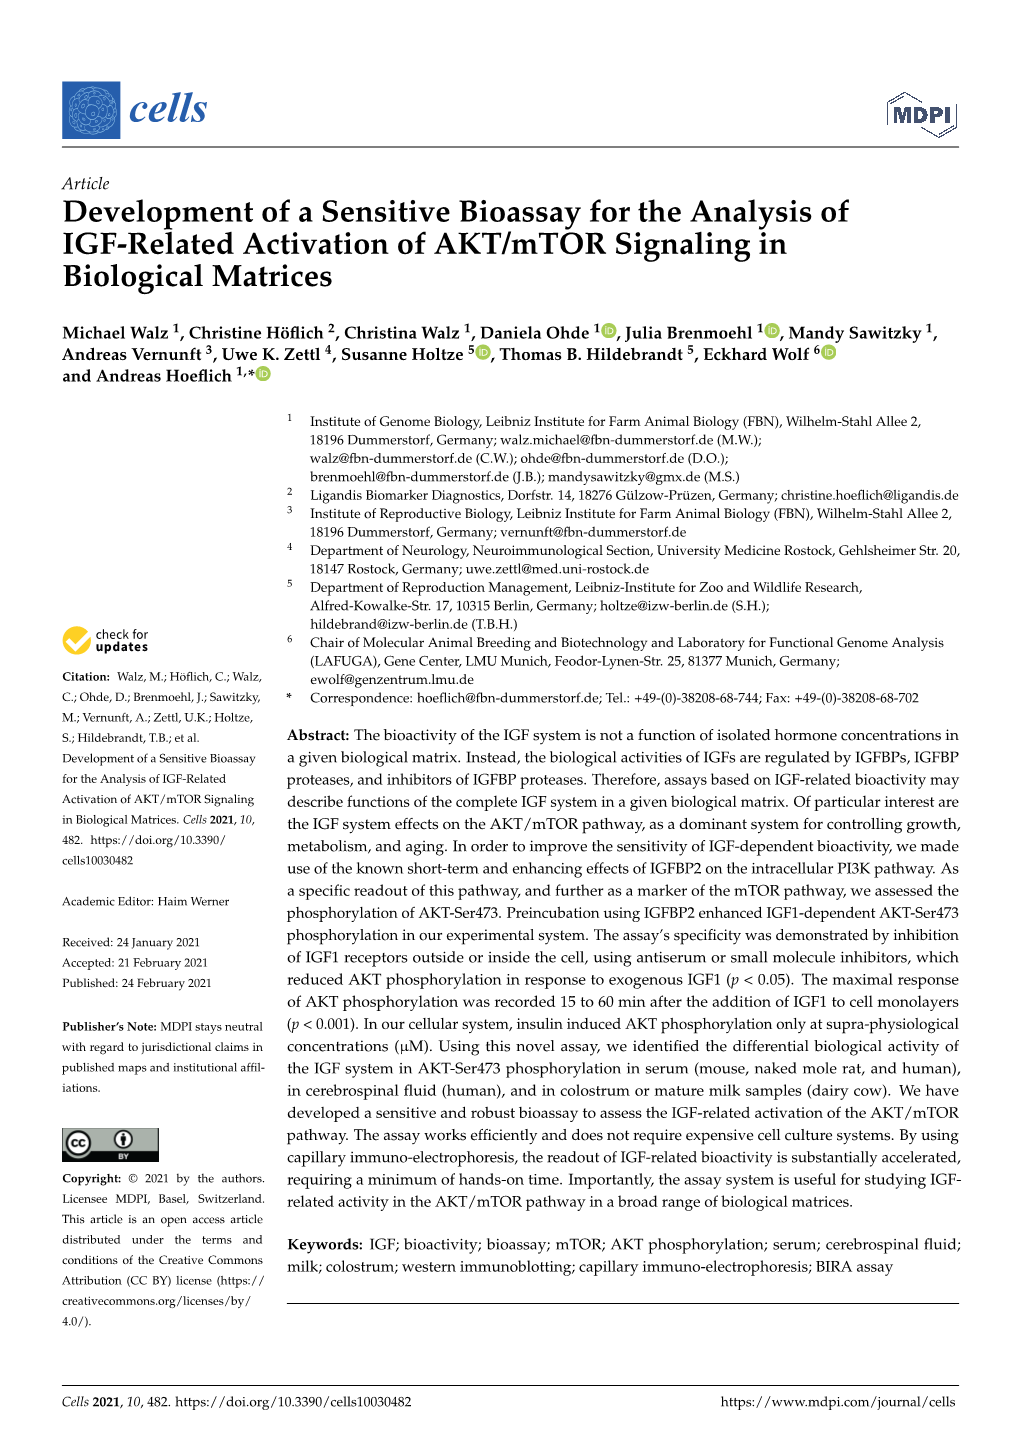 Development of a Sensitive Bioassay for the Analysis of IGF-Related Activation of AKT/Mtor Signaling in Biological Matrices